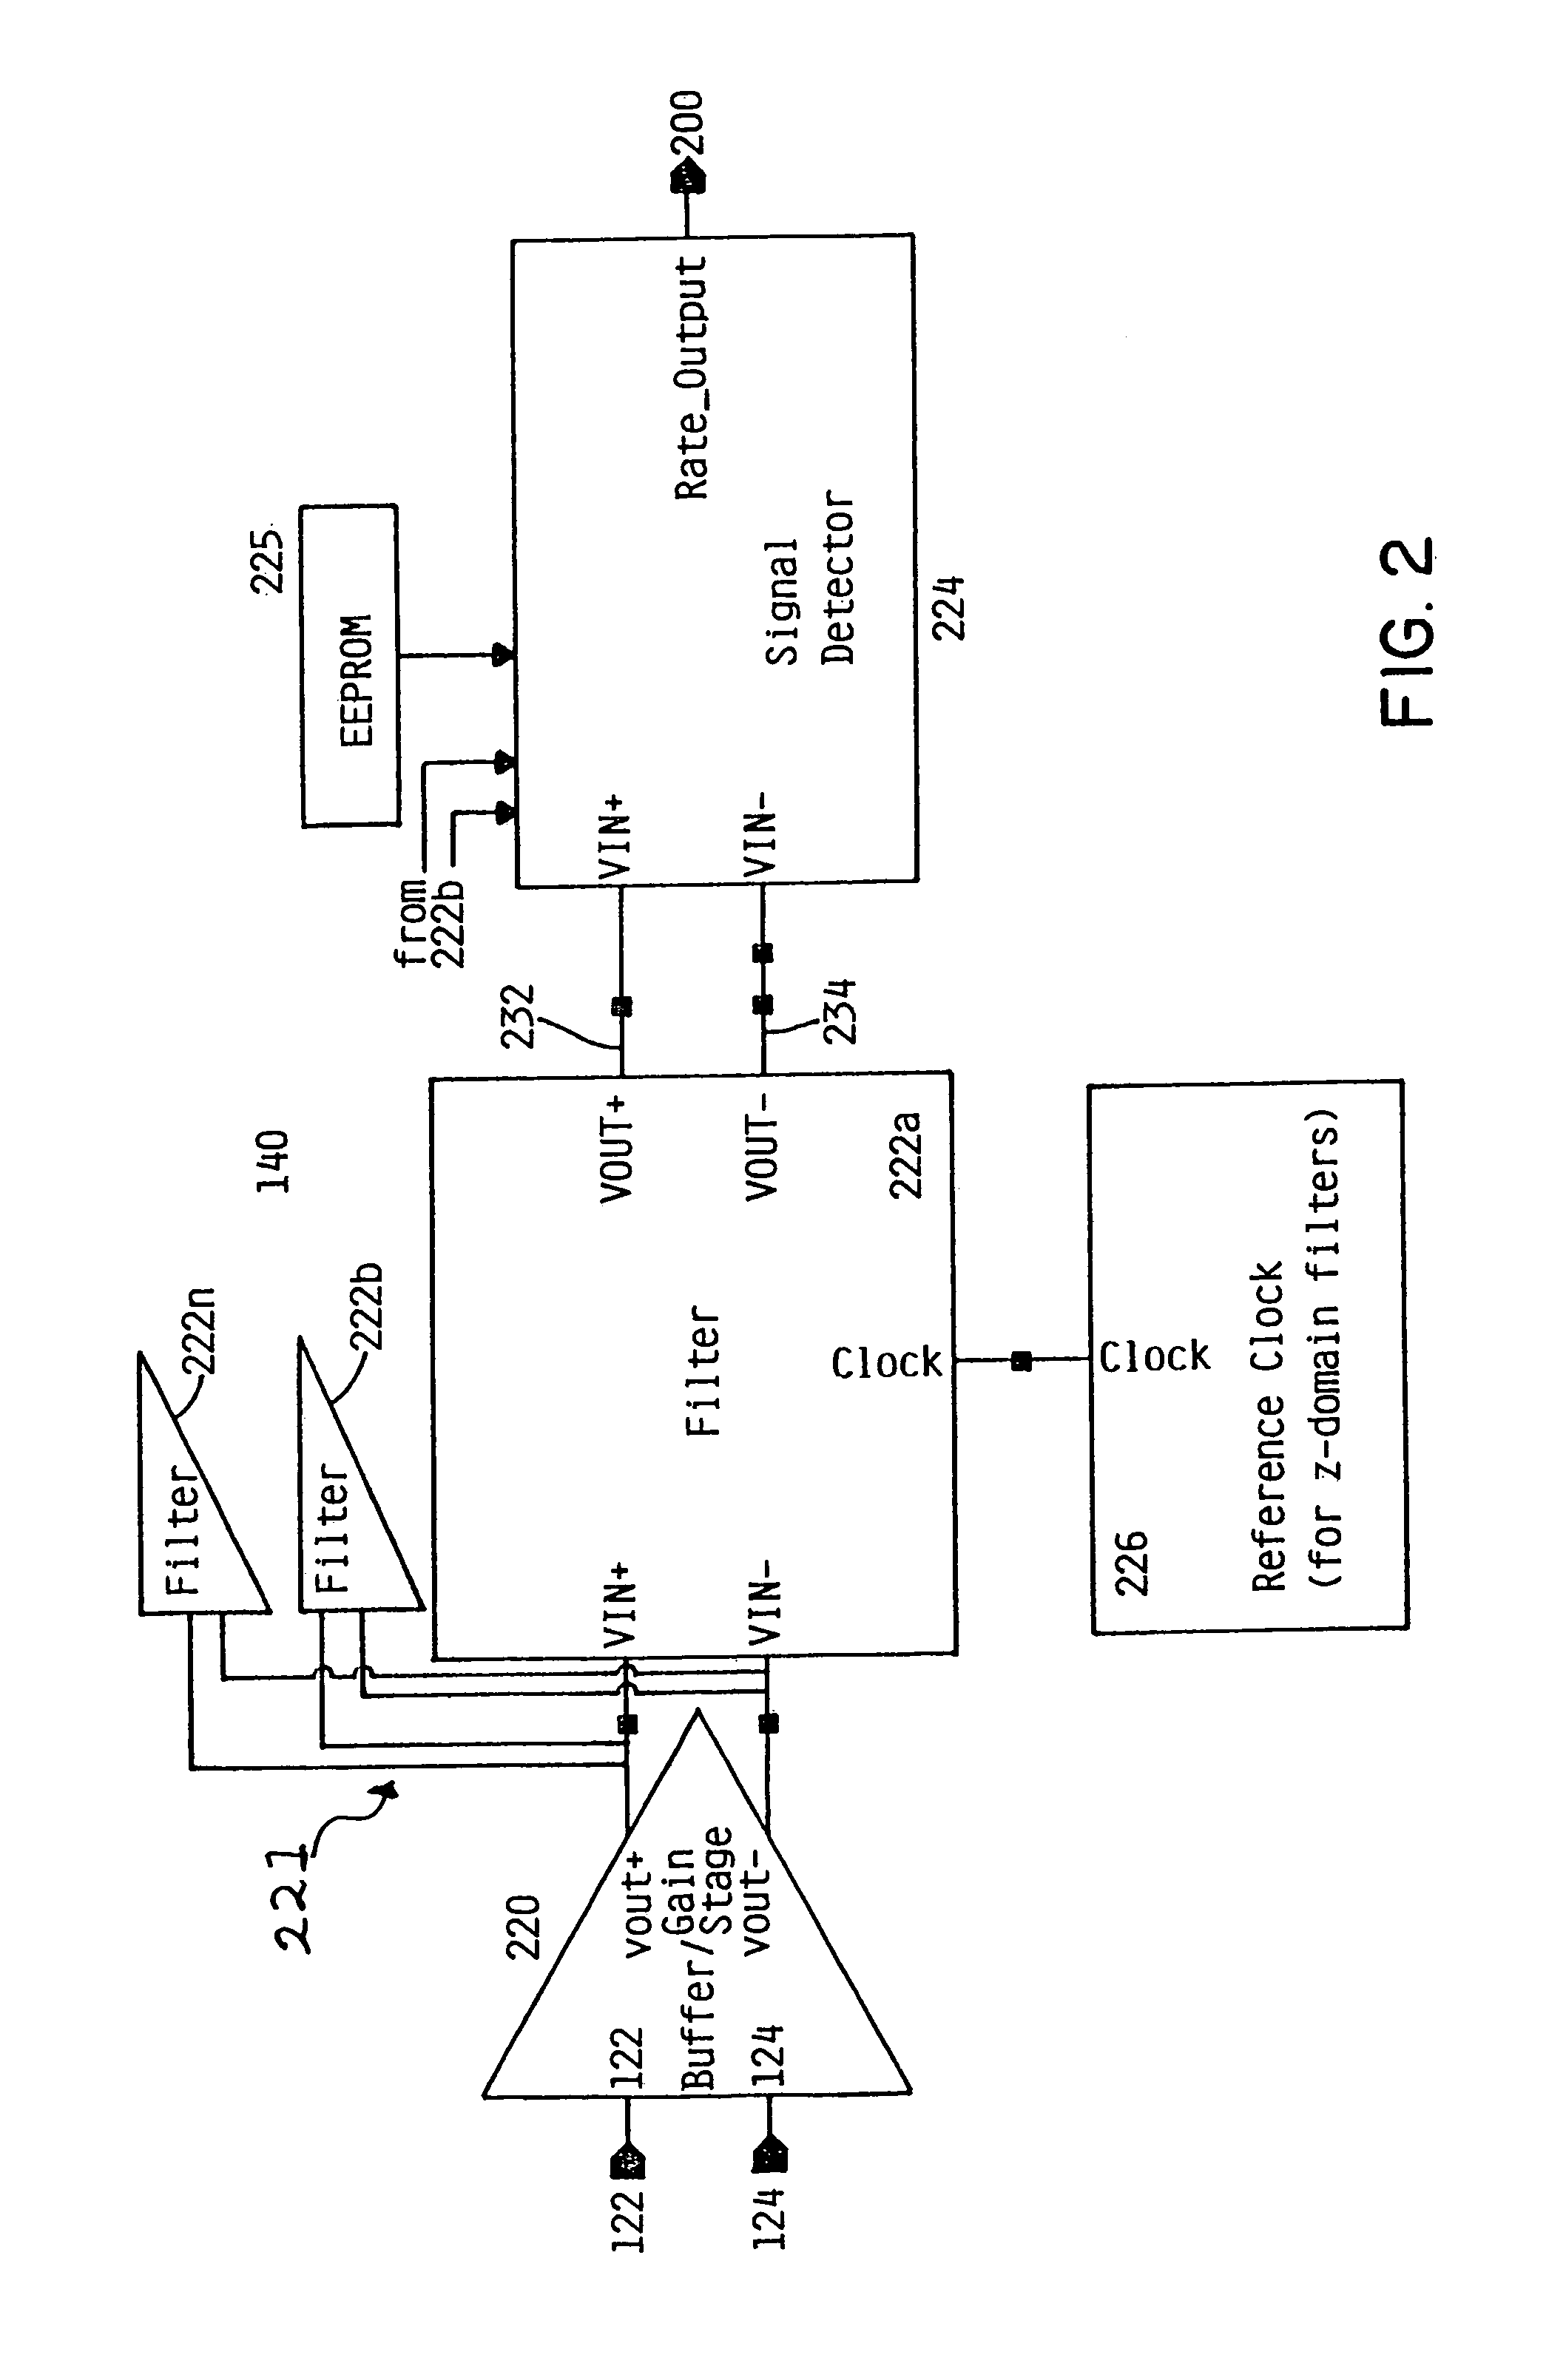 Detection of data transmission rates using passing frequency-selective filtering